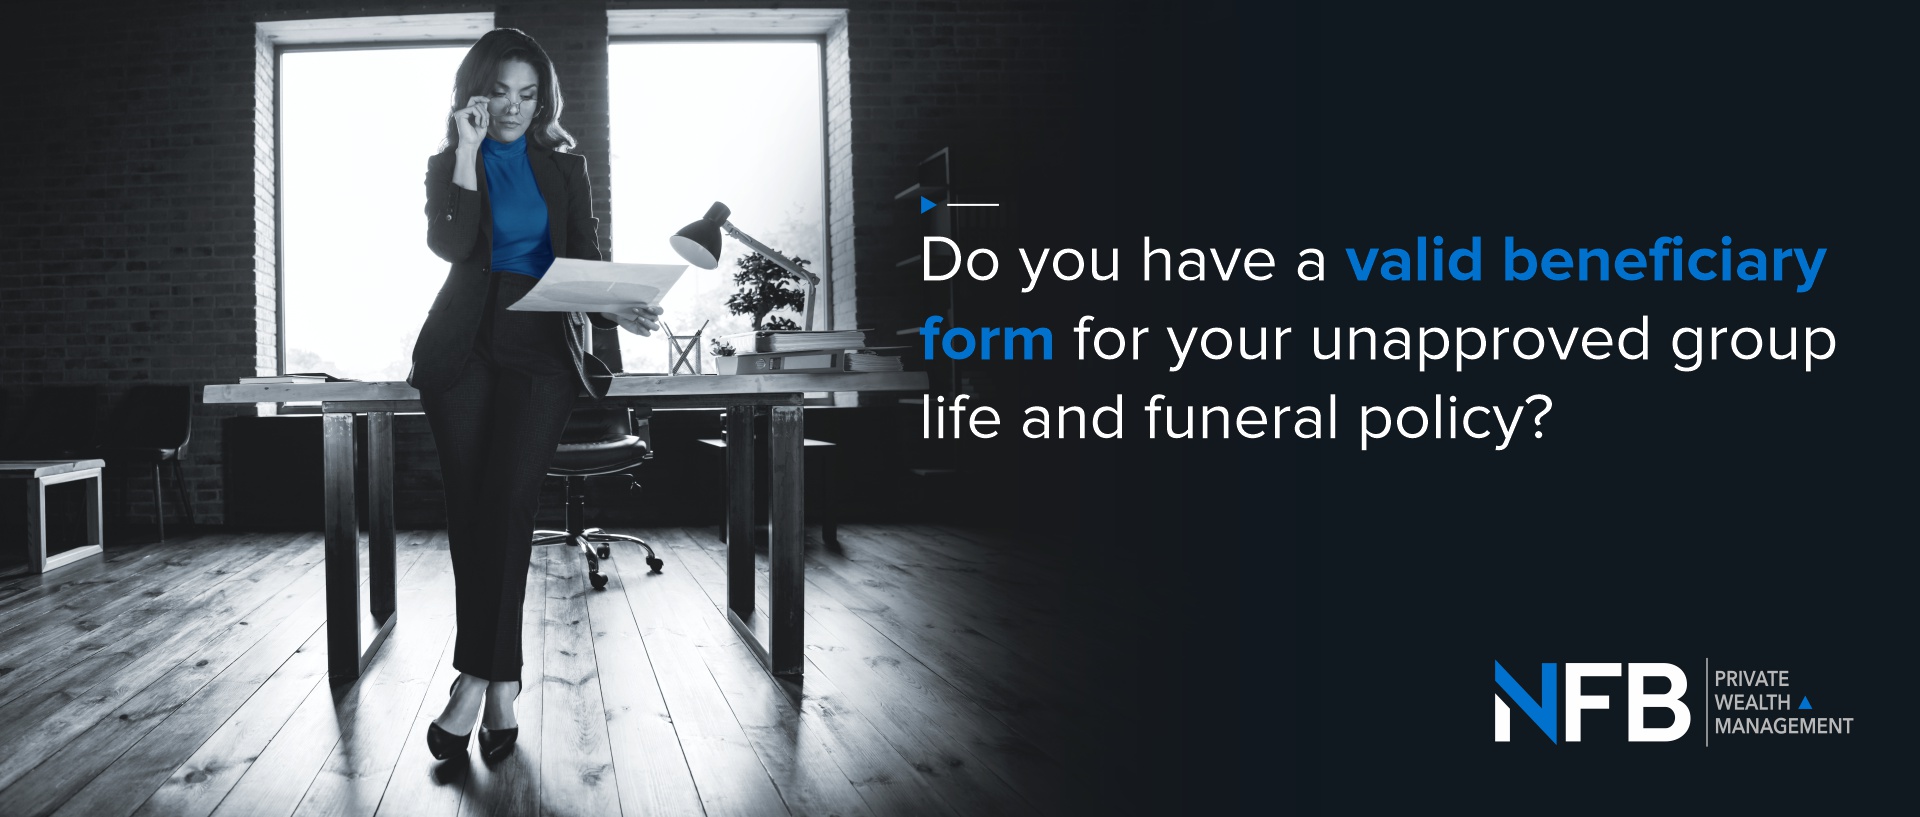 Do you have a valid beneficiary form for your unapproved group life and funeral policy?